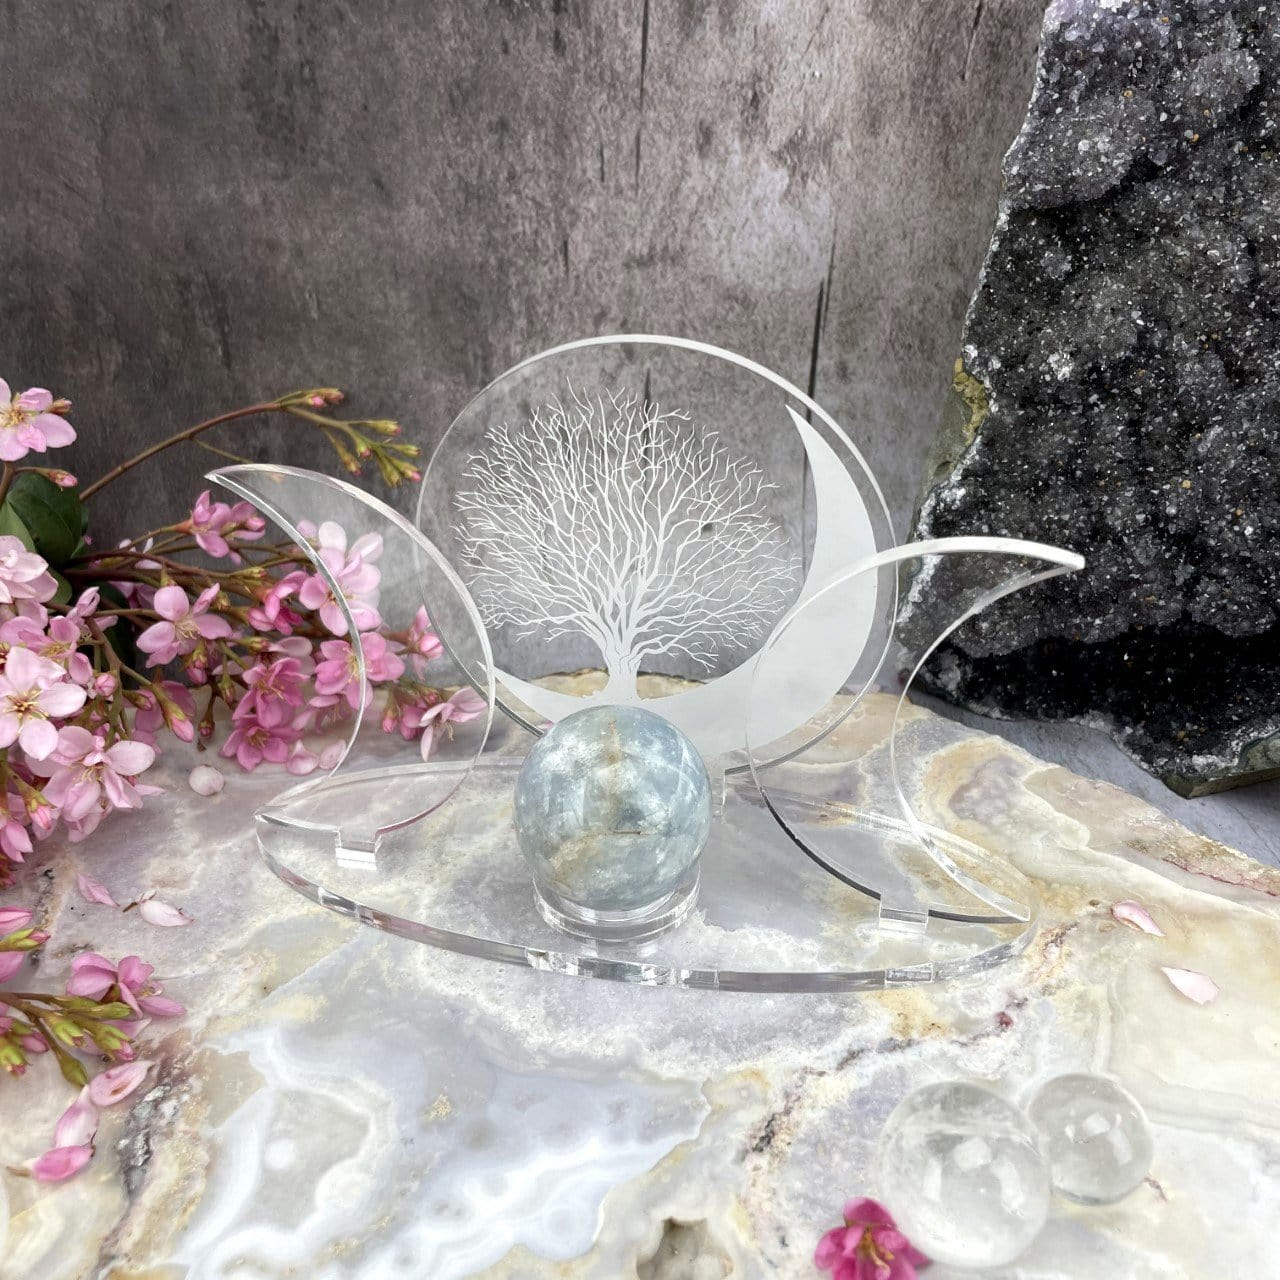 An Acrylic Sphere Holder Crescent Moons - Tree of Life holding a sphere in an alter that consists of flowers and crystals.